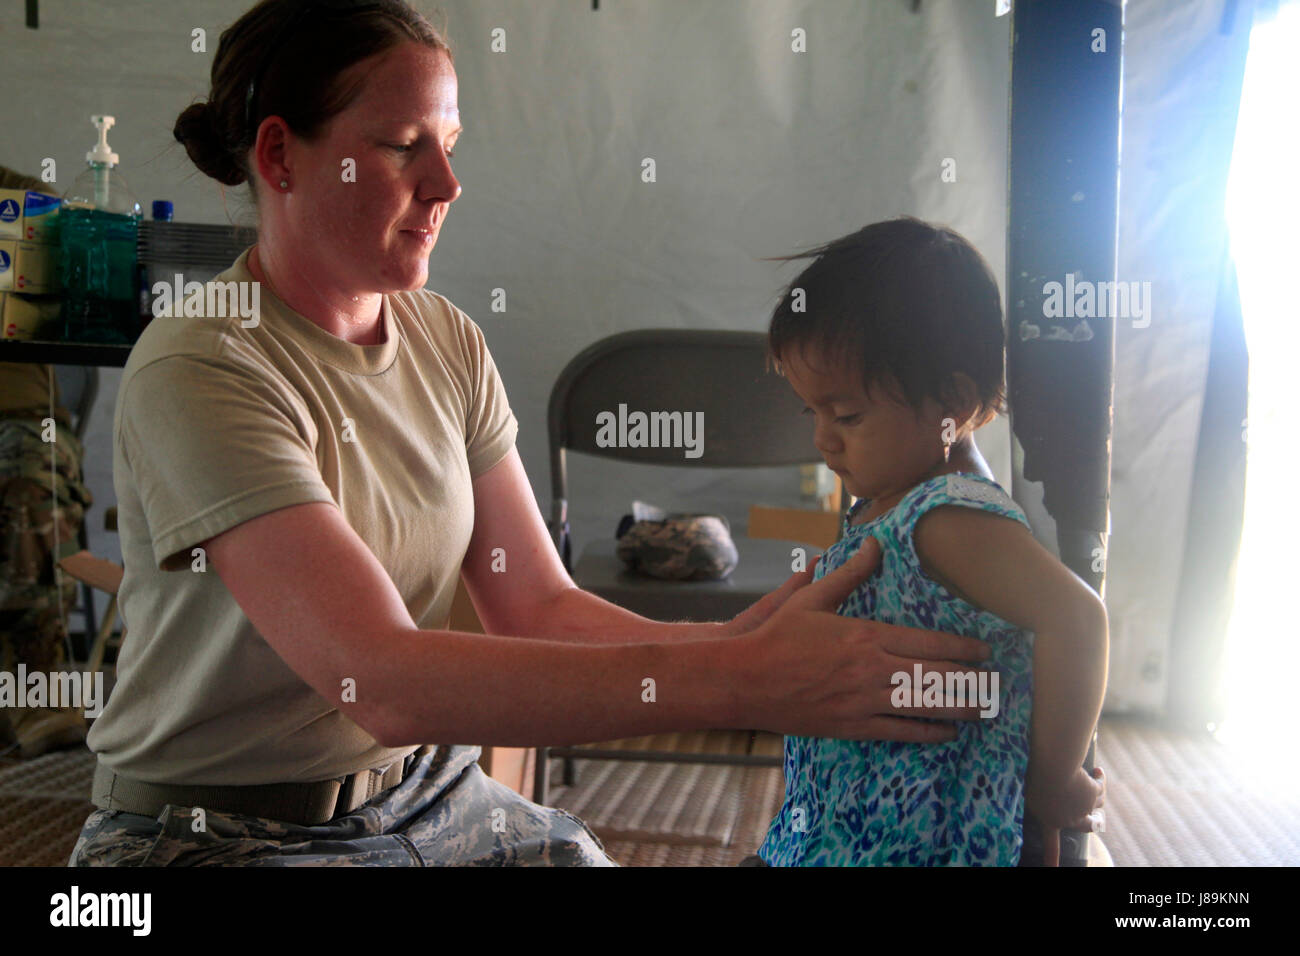 U.S. Air Force Master Sgt. Laura Winn, with the 96th Medical Support Group from Eglin Air Force Base, Florida, measures a patient's height, at a medical readiness event in Dangriga, Belize, May 22, 2017. This is the third medical and final event scheduled for Beyond the Horizon 2017, a U.S. Southern Command-sponsored, Army South-led exercise designed to provide humanitarian and engineering services to communities in need, demonstrating U.S. support for Belize. (U.S. Army photo by Spc. Kelson Brooks) (RELEASED) Stock Photo